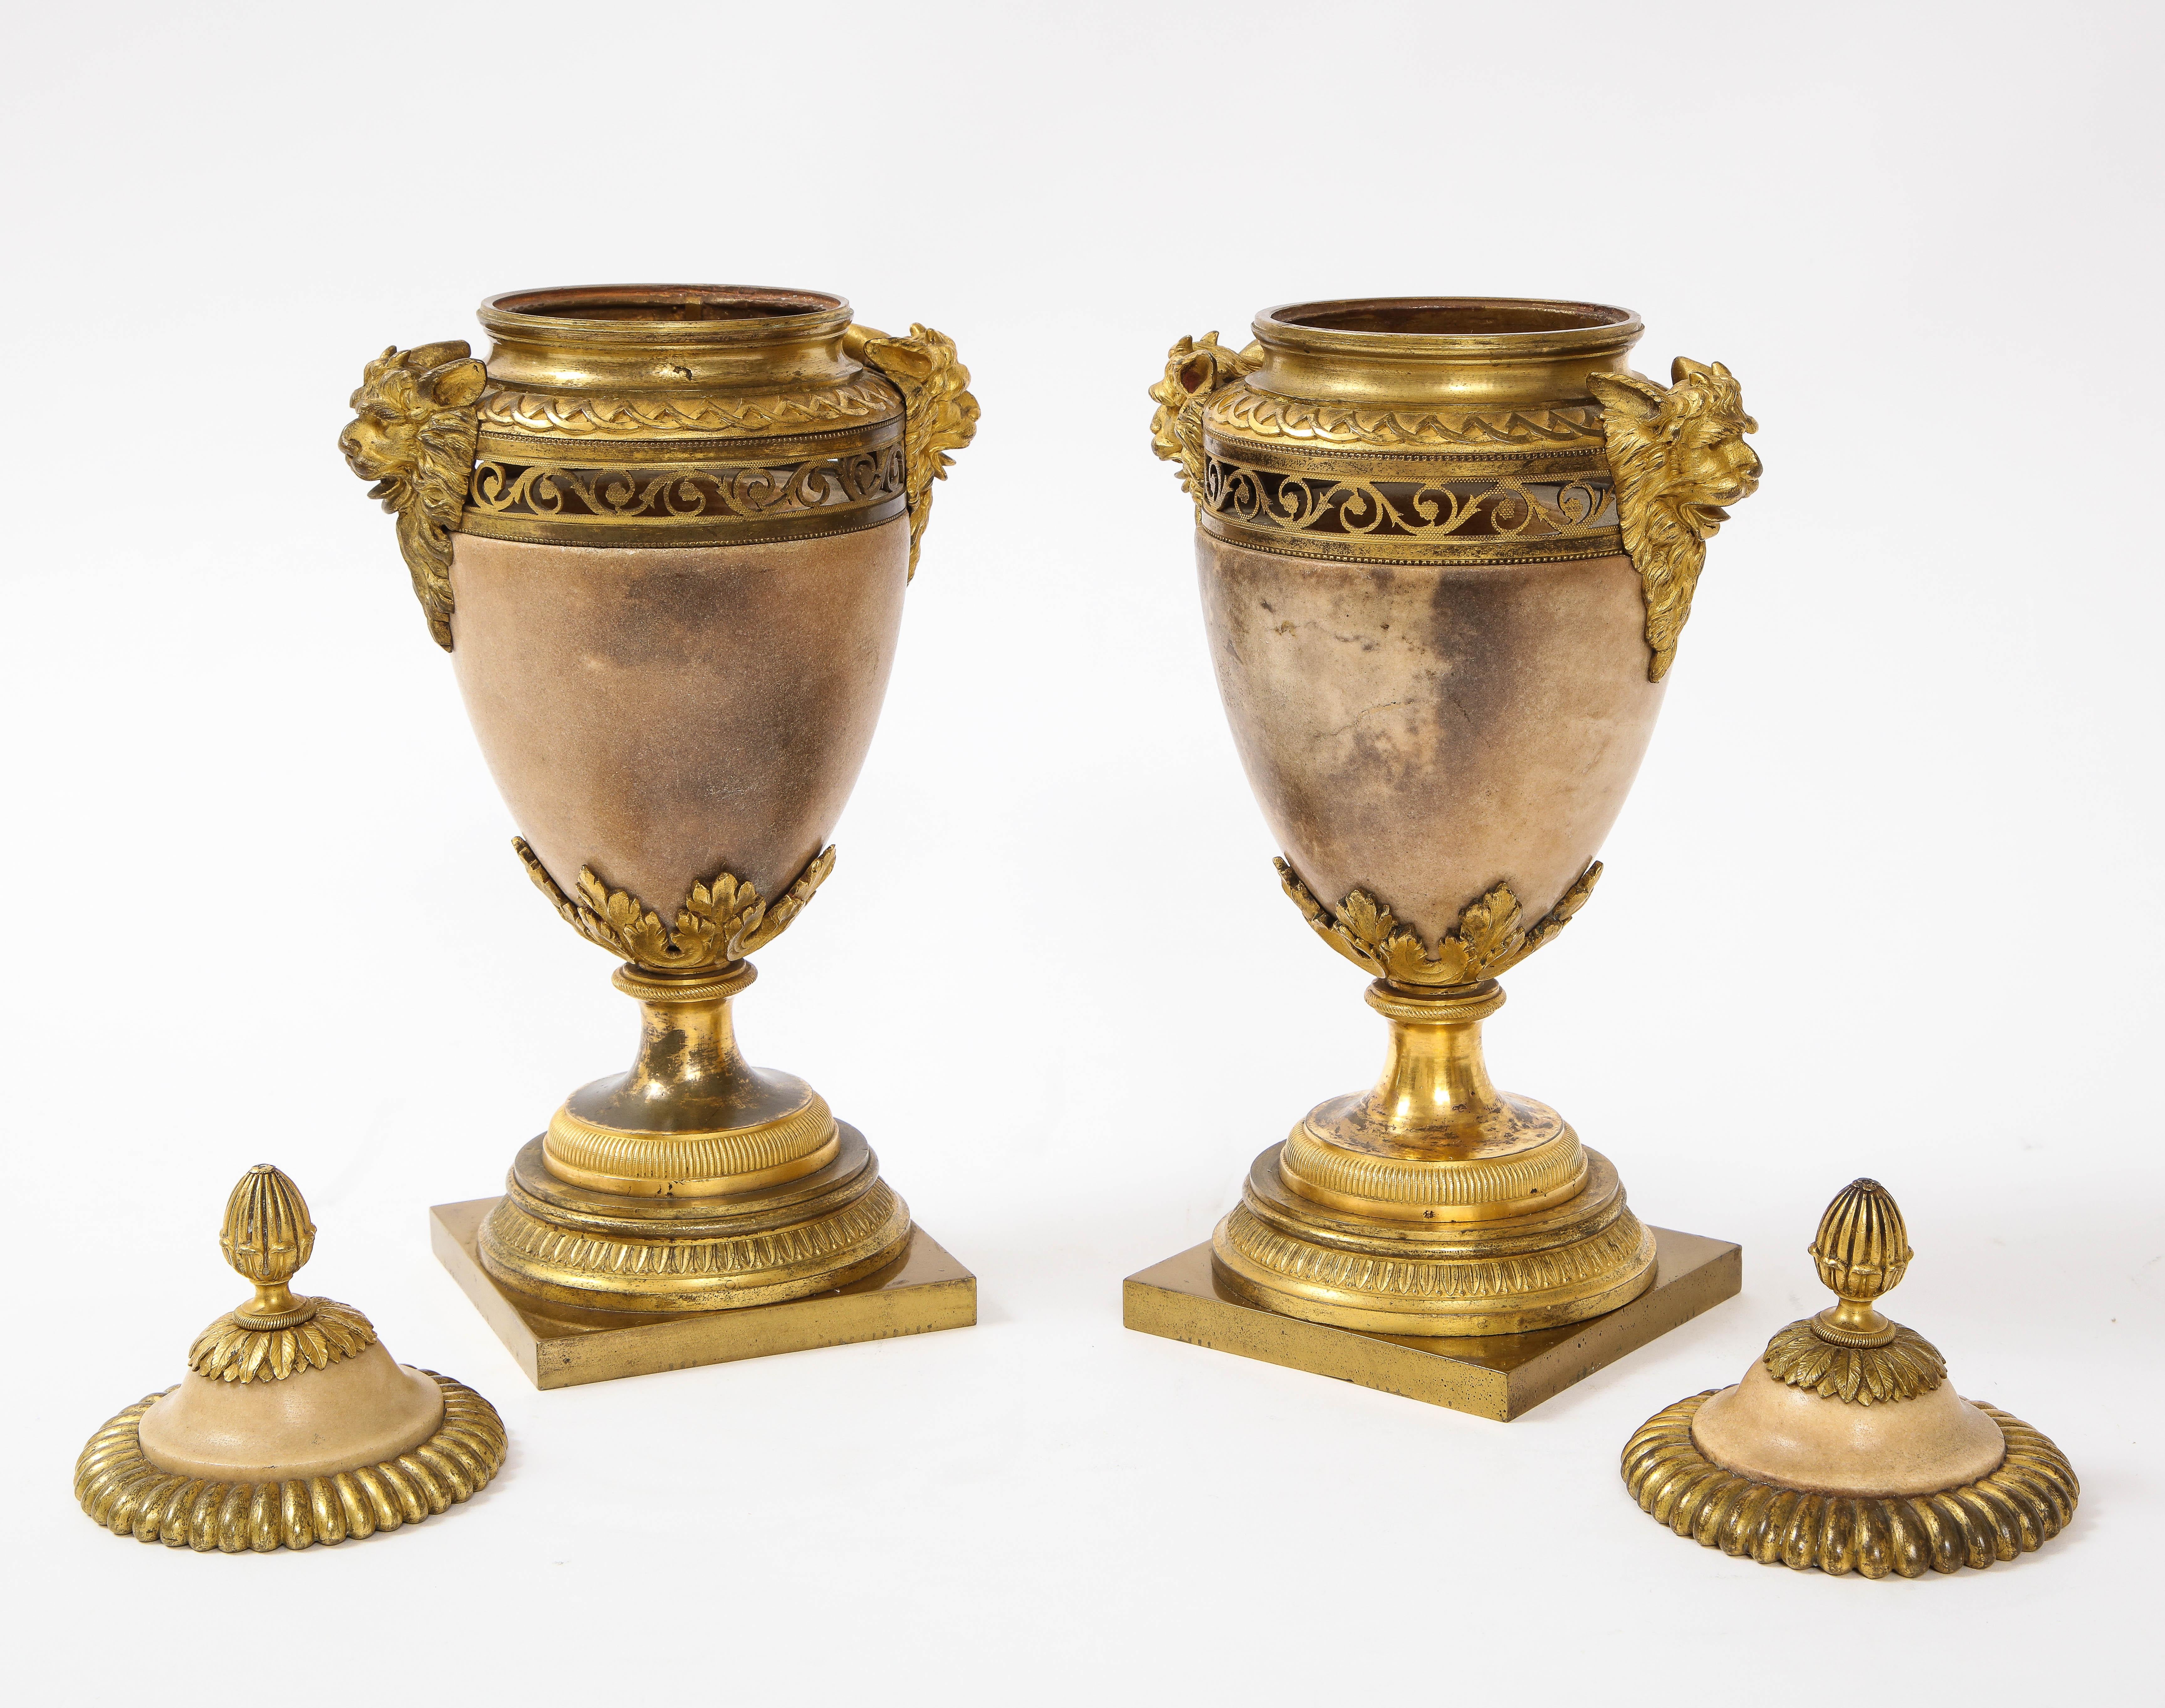 Pair of Louis XVI North European Neoclassical Ormolu and Marble Potpourris For Sale 2